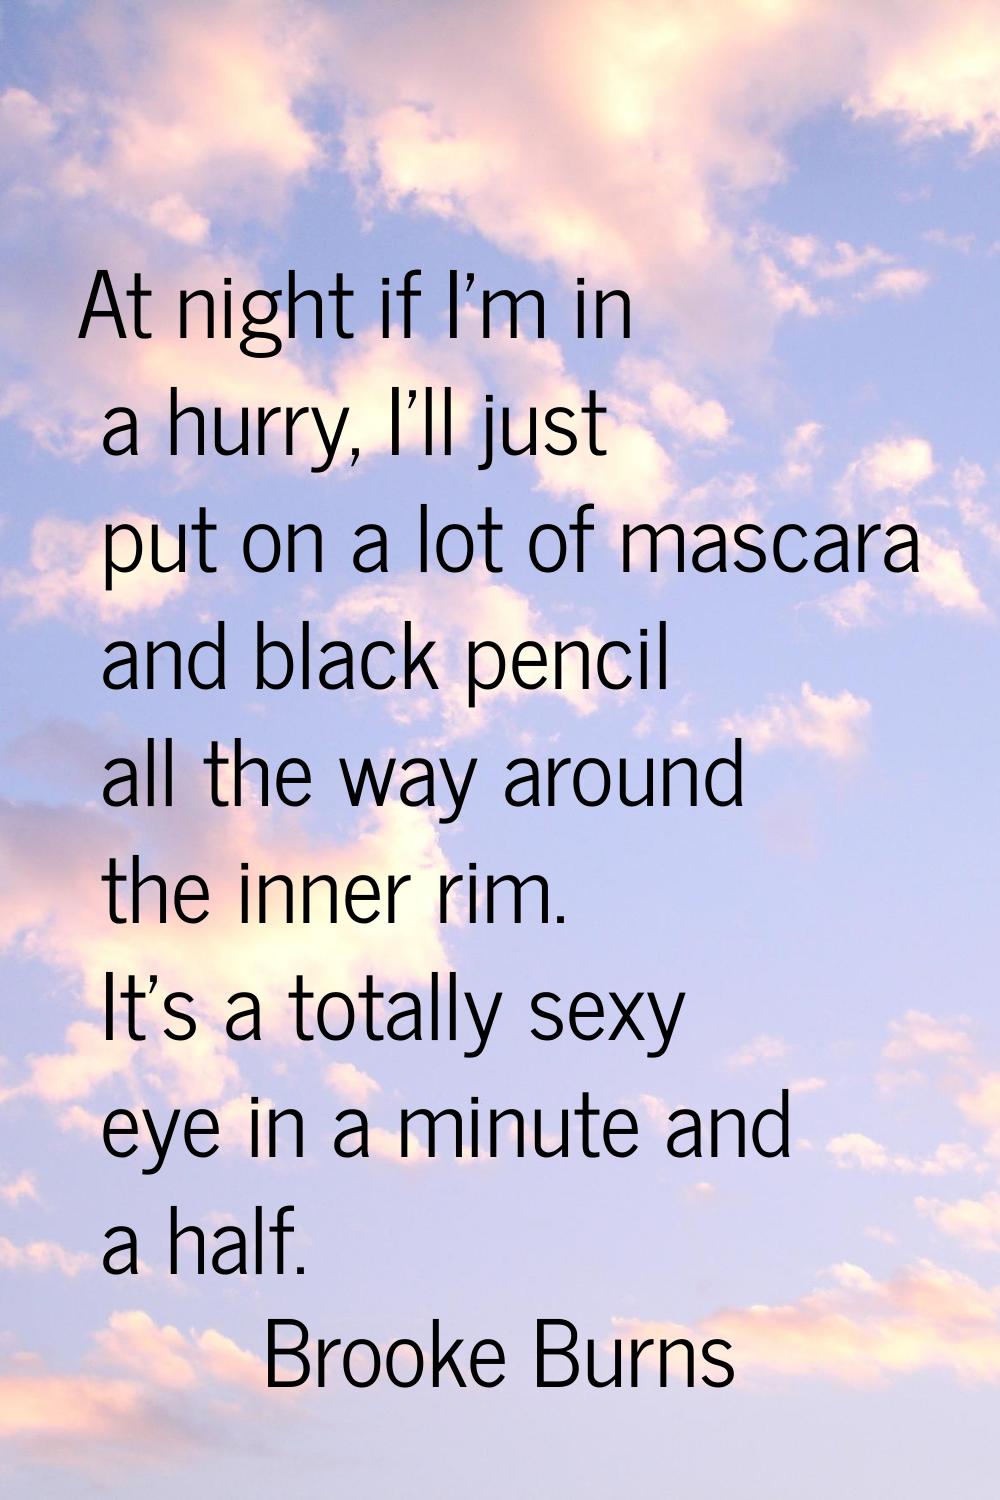 At night if I'm in a hurry, I'll just put on a lot of mascara and black pencil all the way around t